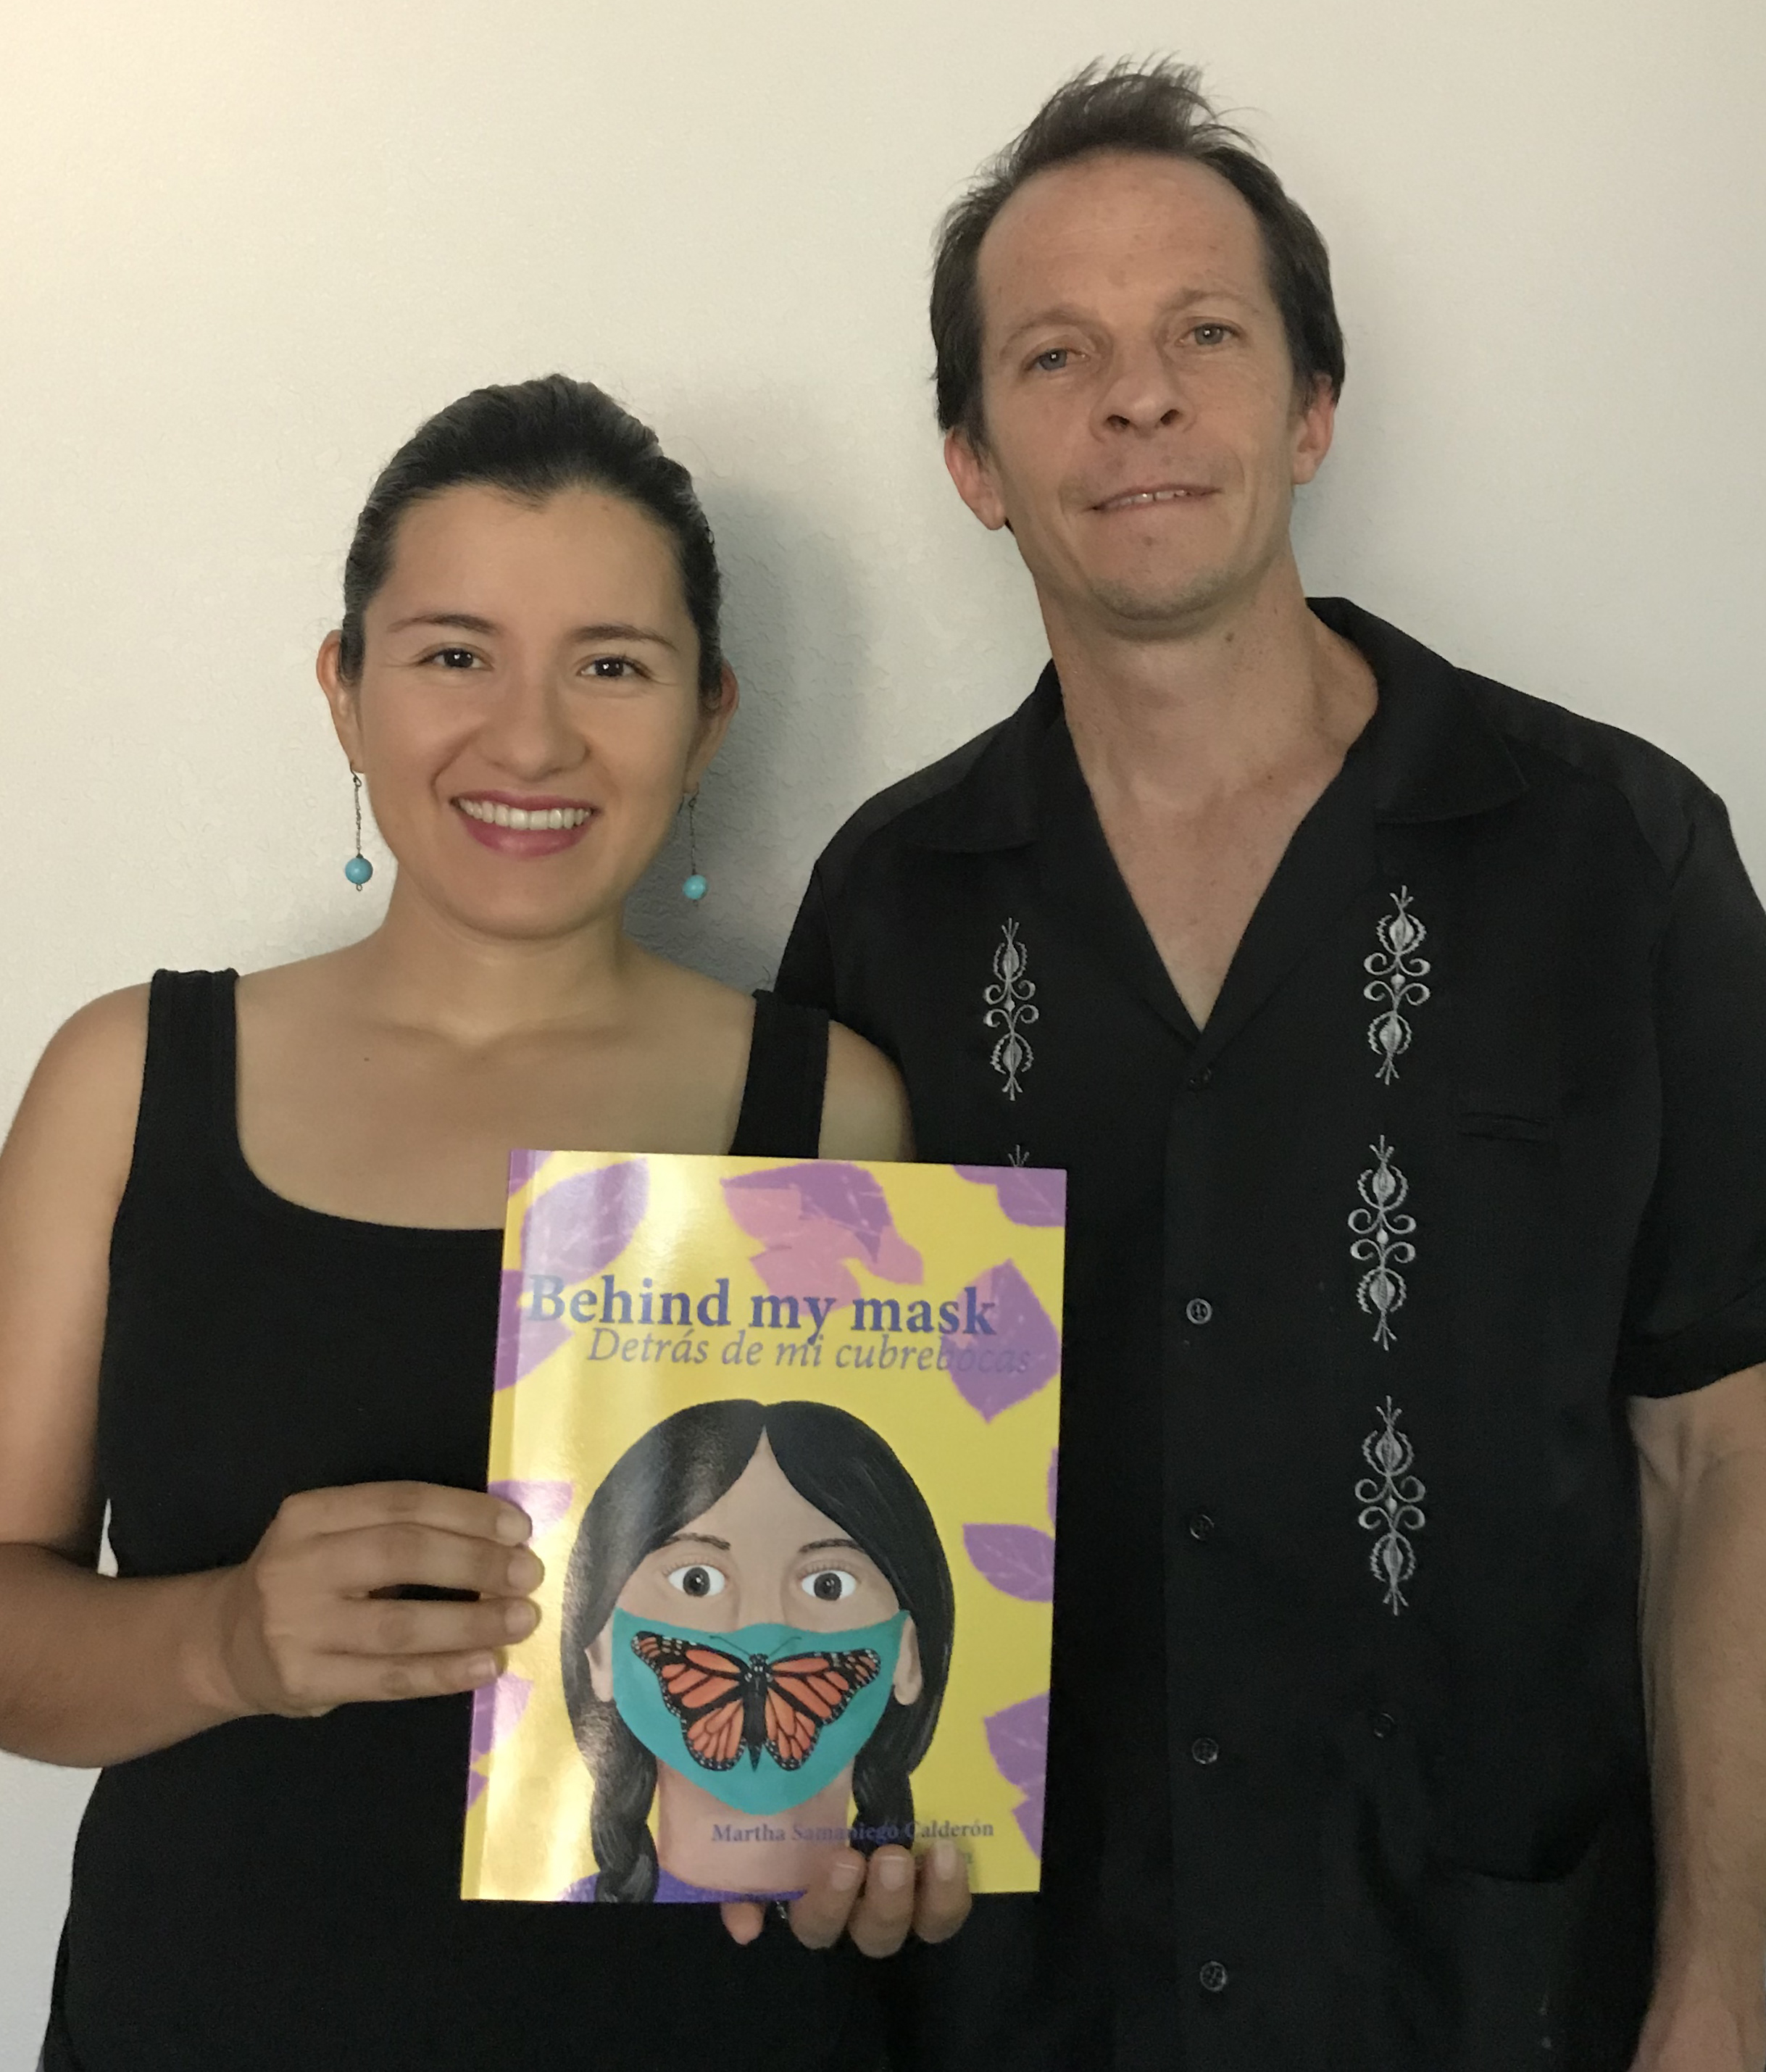 UNT professor and student create bilingual education book to discuss identity and emotions amid pandemic